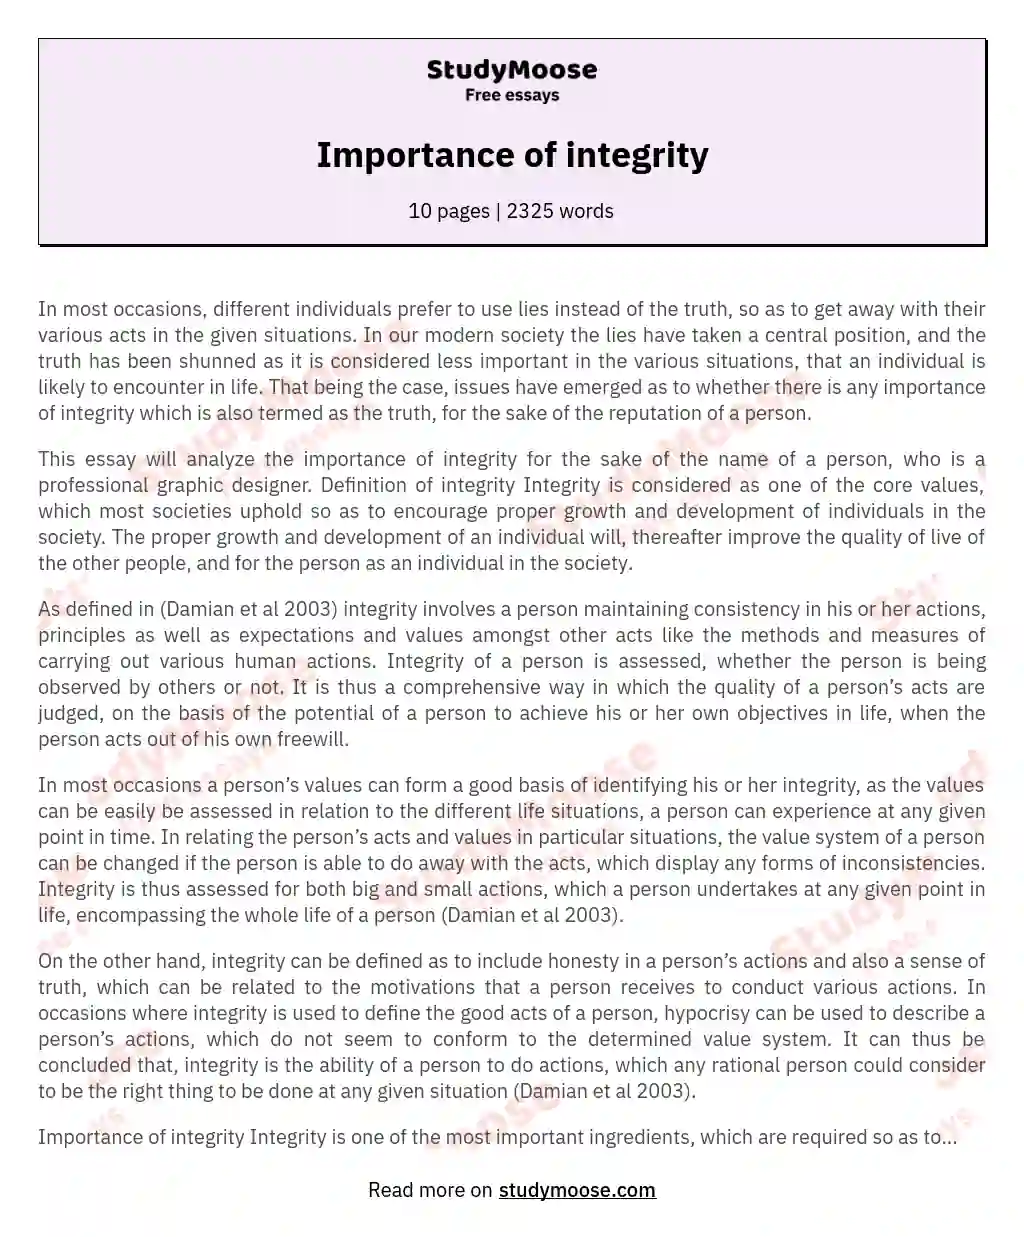 Importance of integrity essay